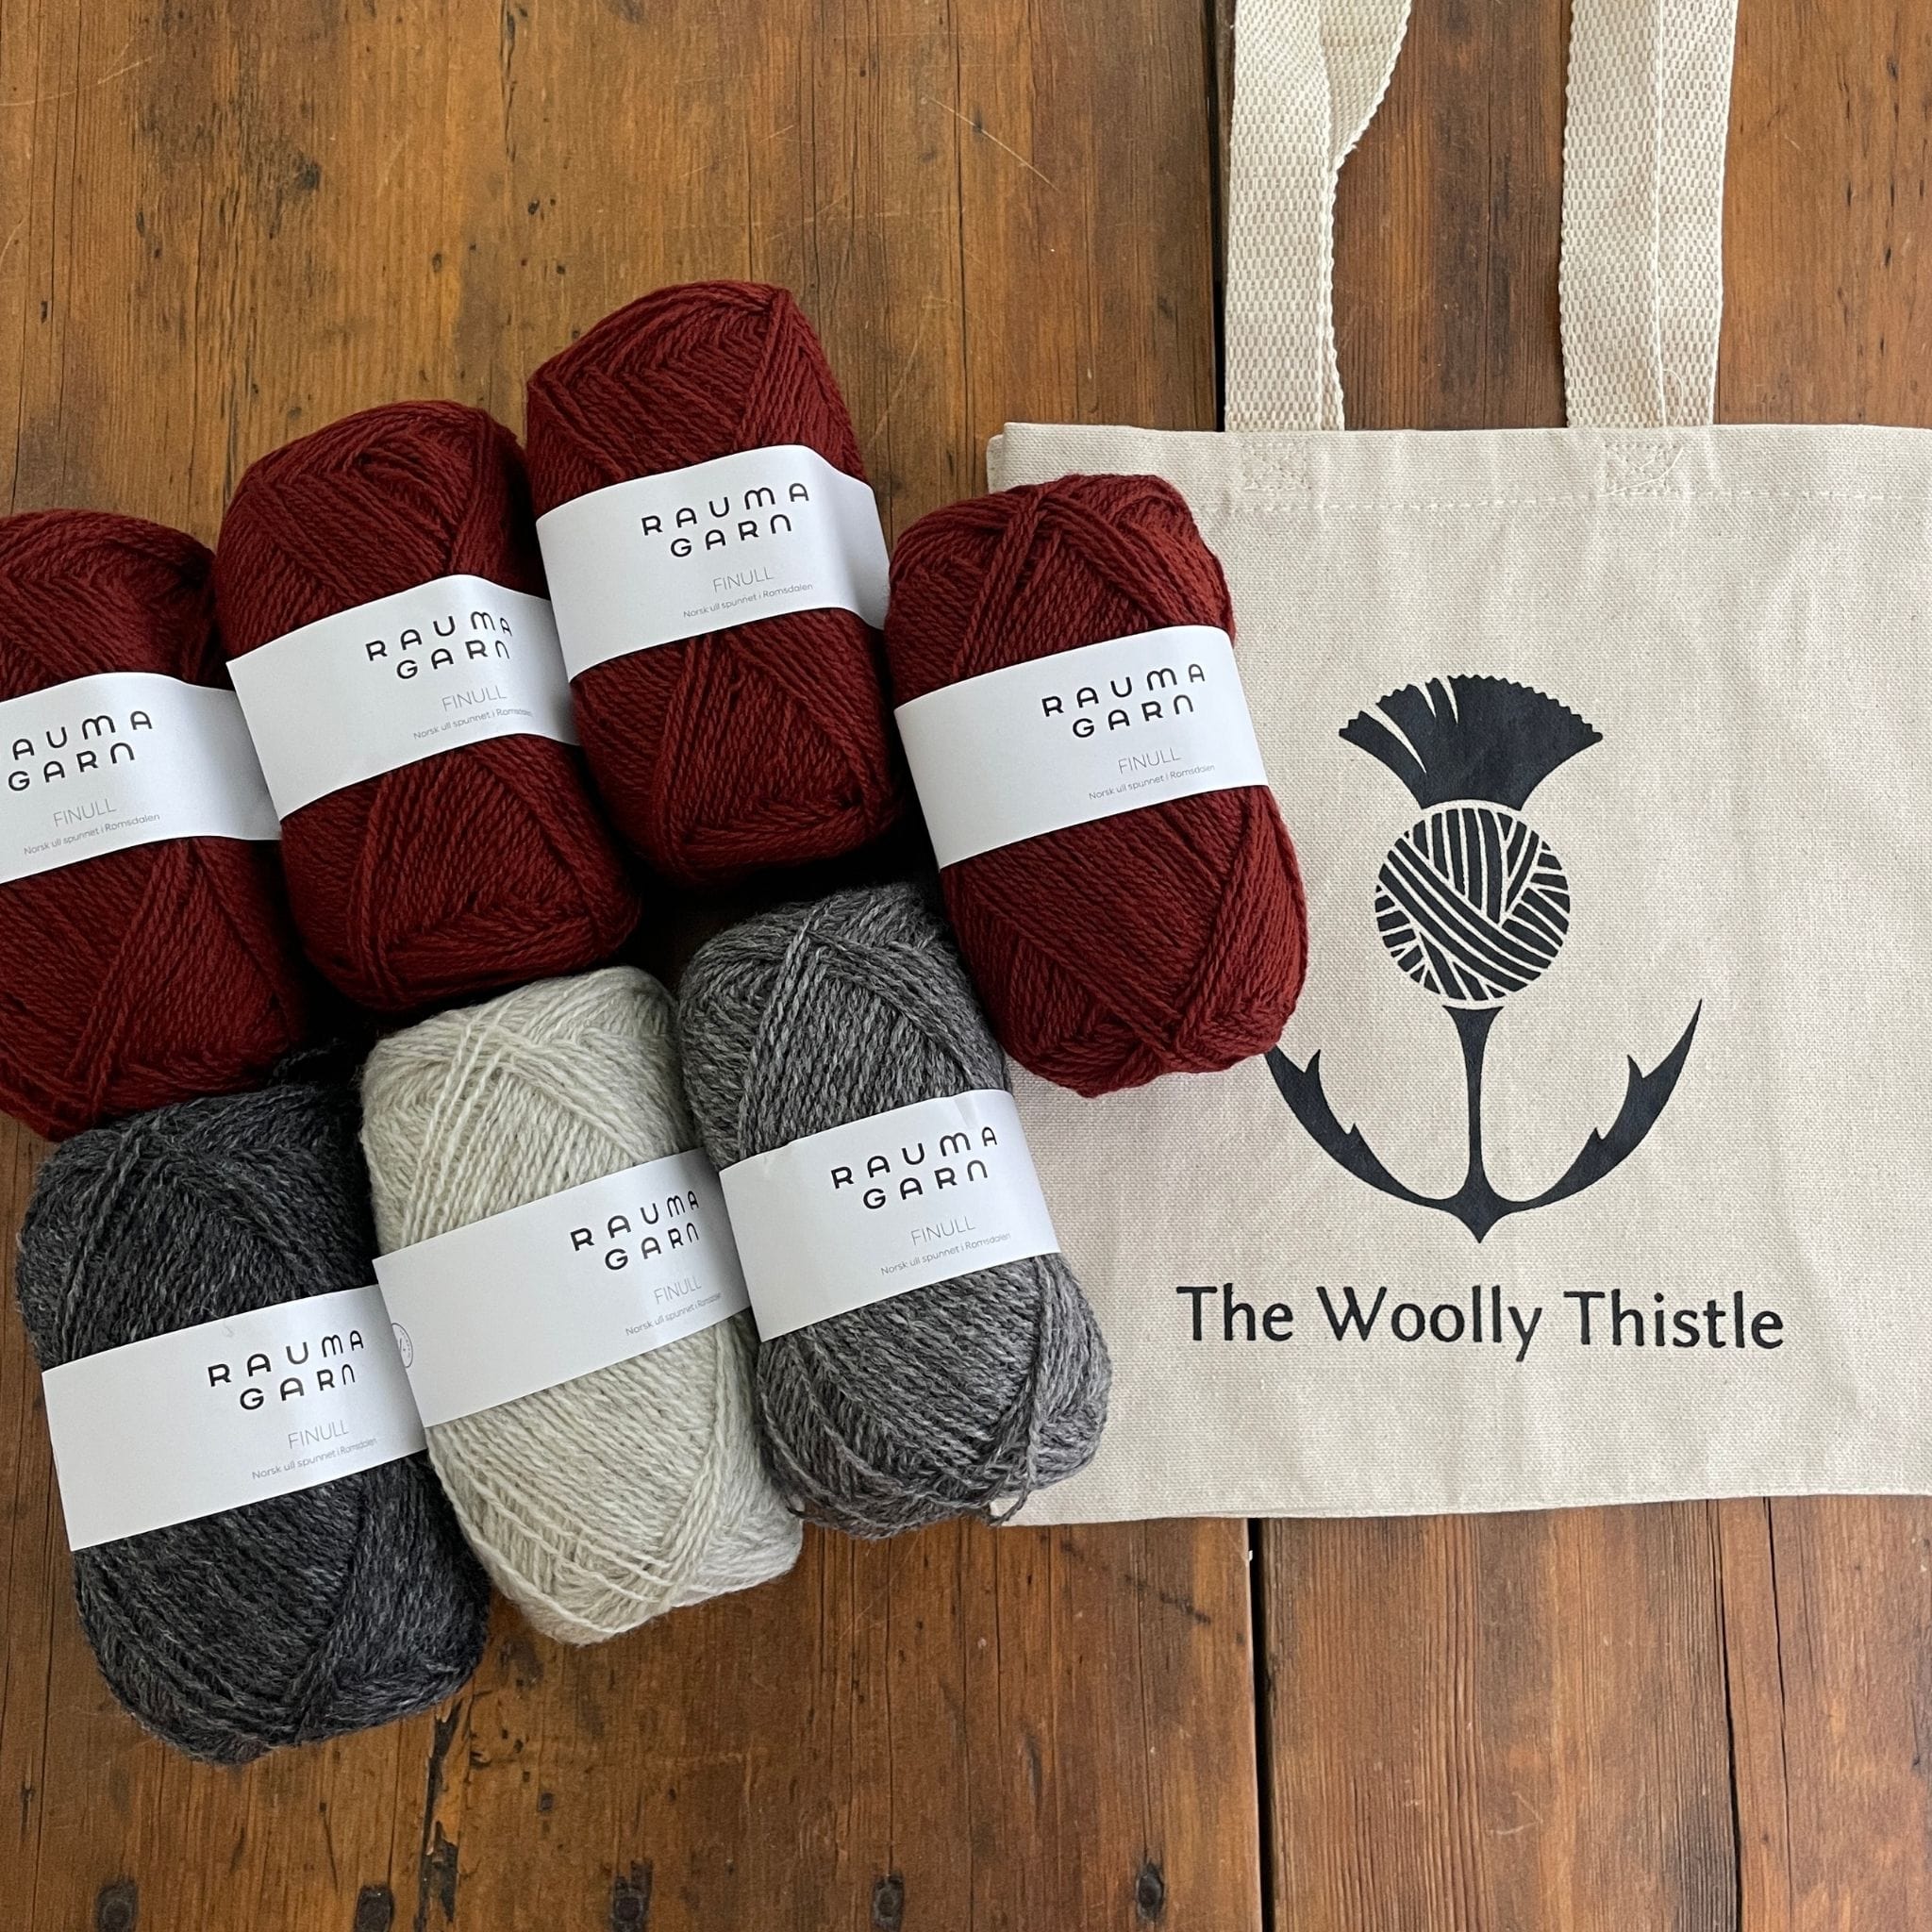 Components of the Varde Skirt Kit including TWT Tote, and Rauma Finullgarn yarn in Burgundy and greys.